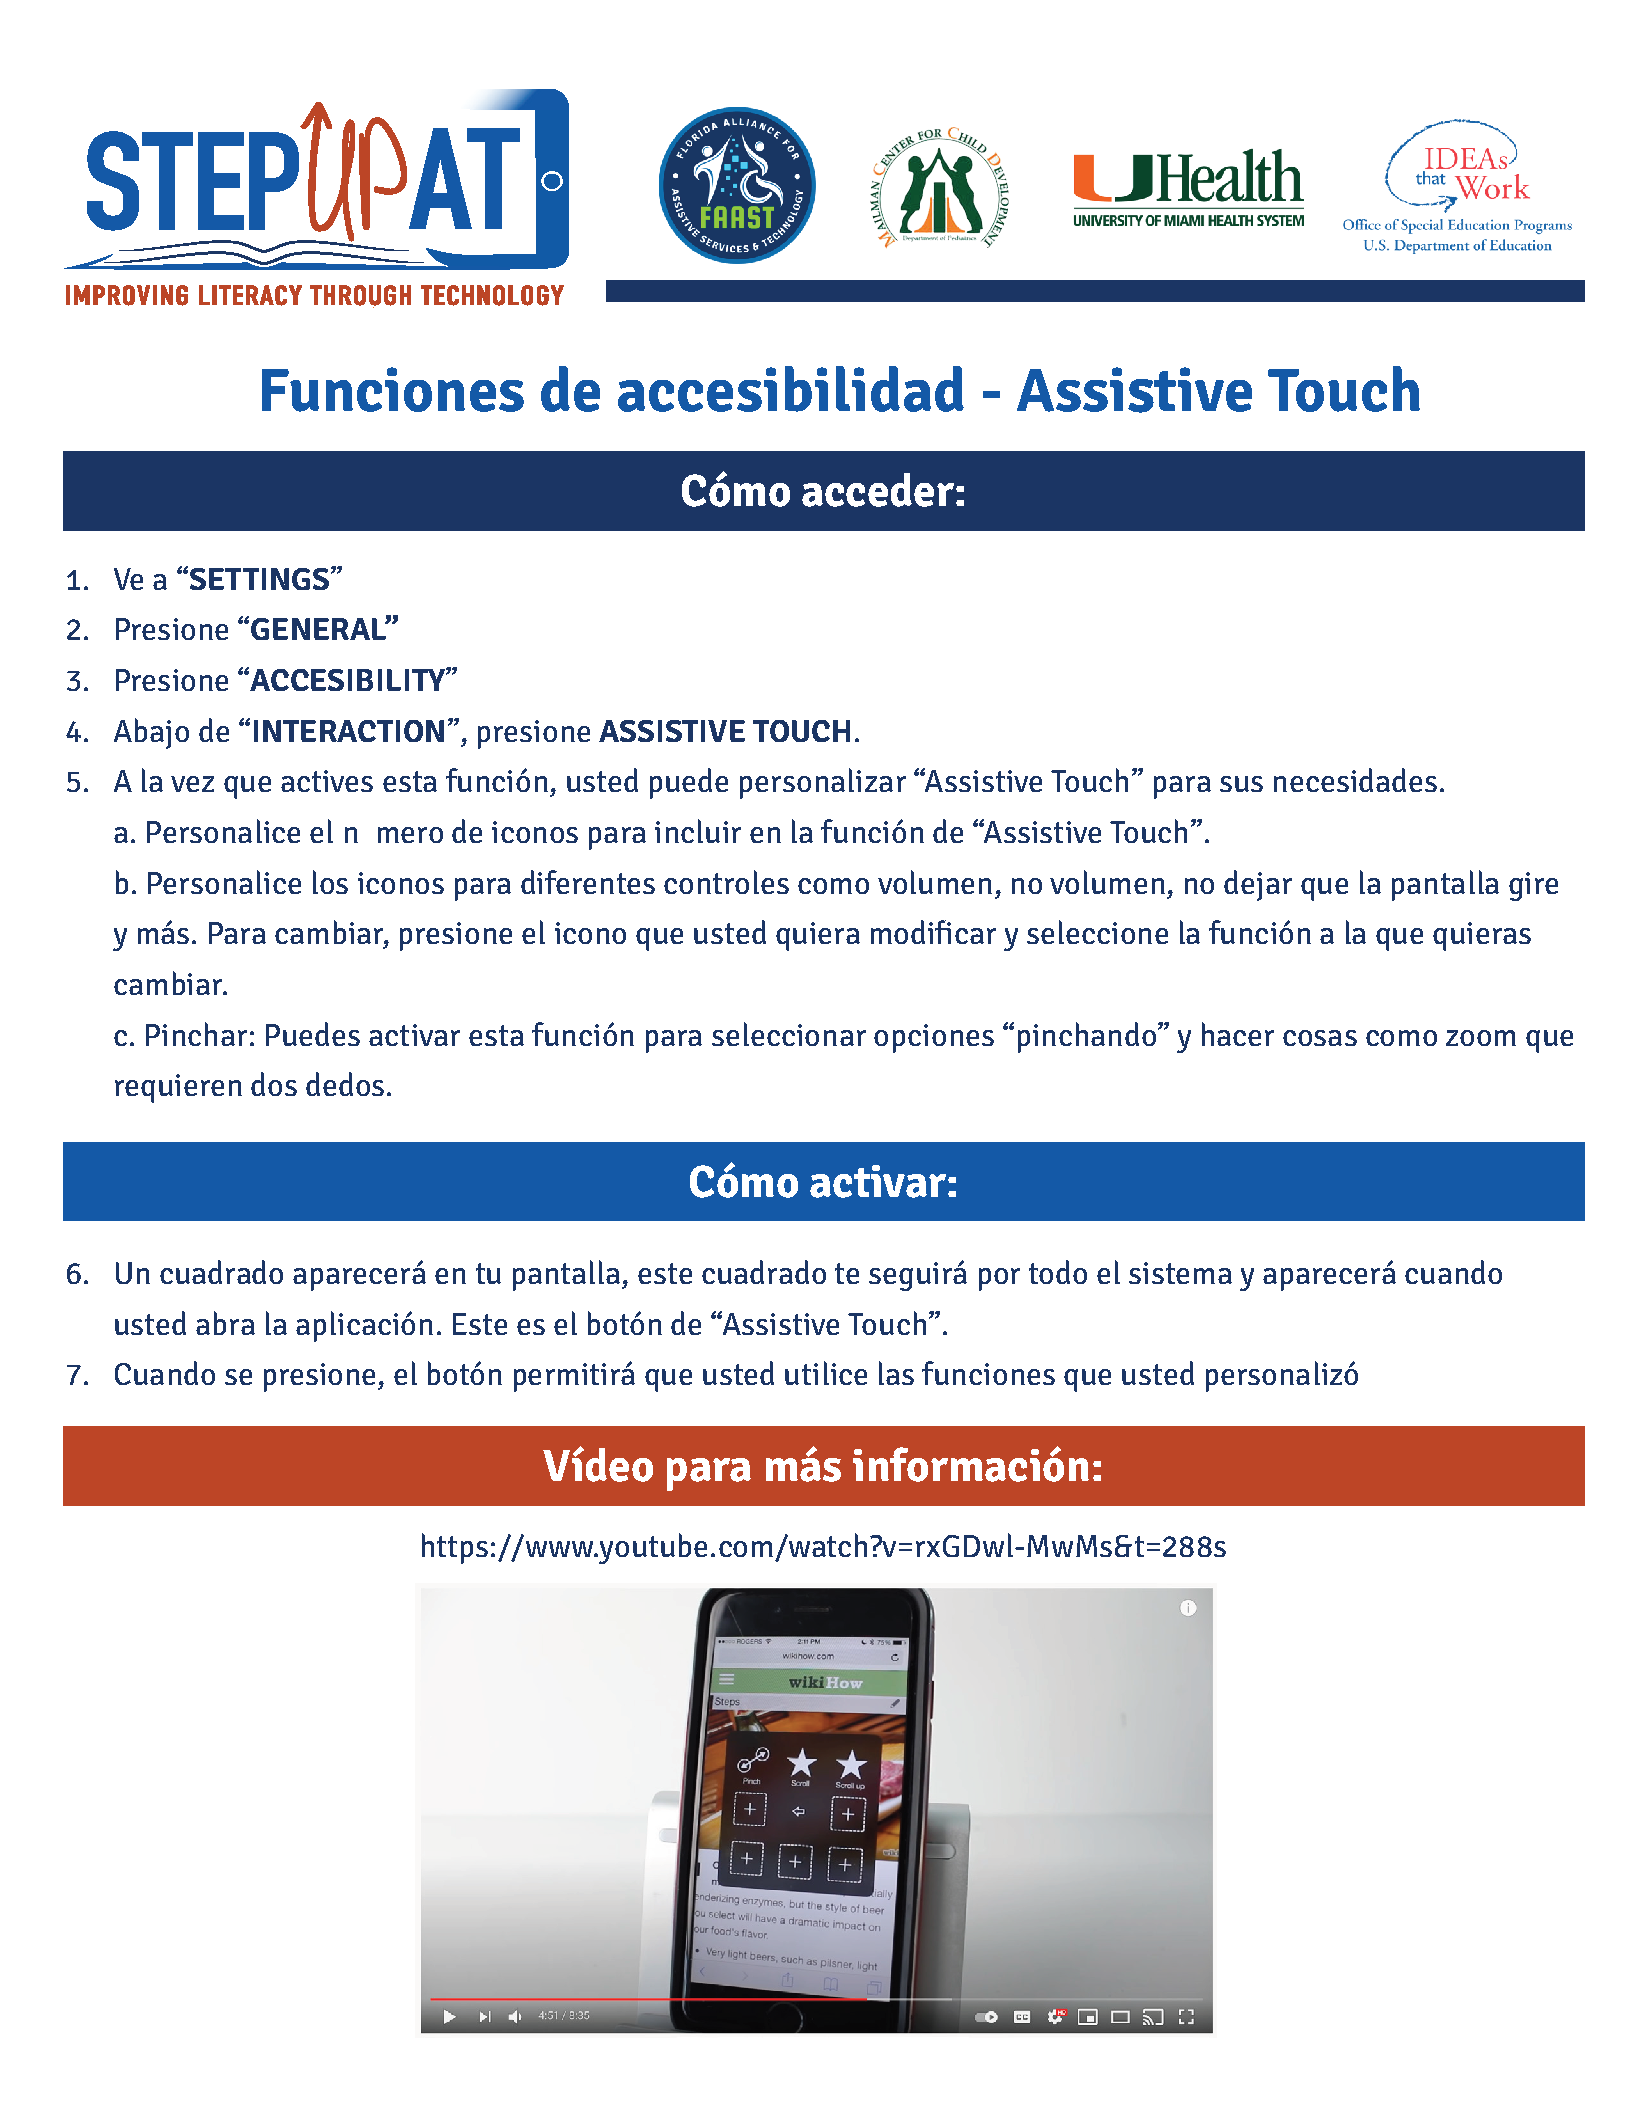 Funciones de accesibilidad - Assistive Touch example of PDF that can be downloaded by parents or teachers.